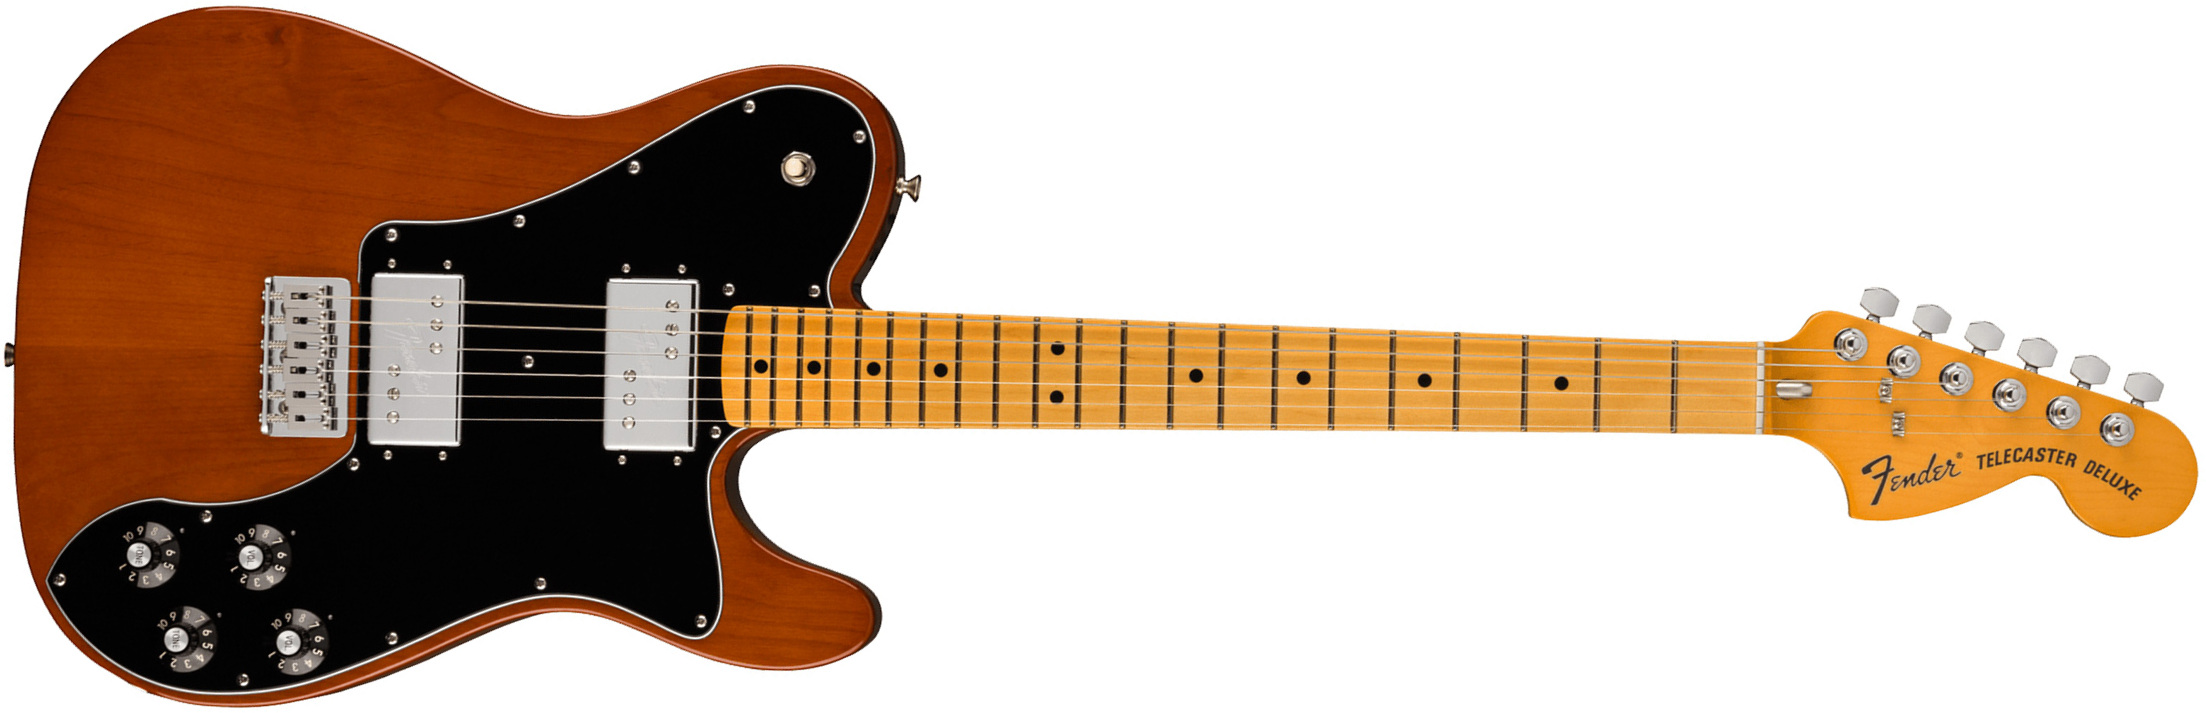 Fender Tele Deluxe 1975 American Vintage Ii Usa 2h Ht Mn - Mocha - Tel shape electric guitar - Main picture